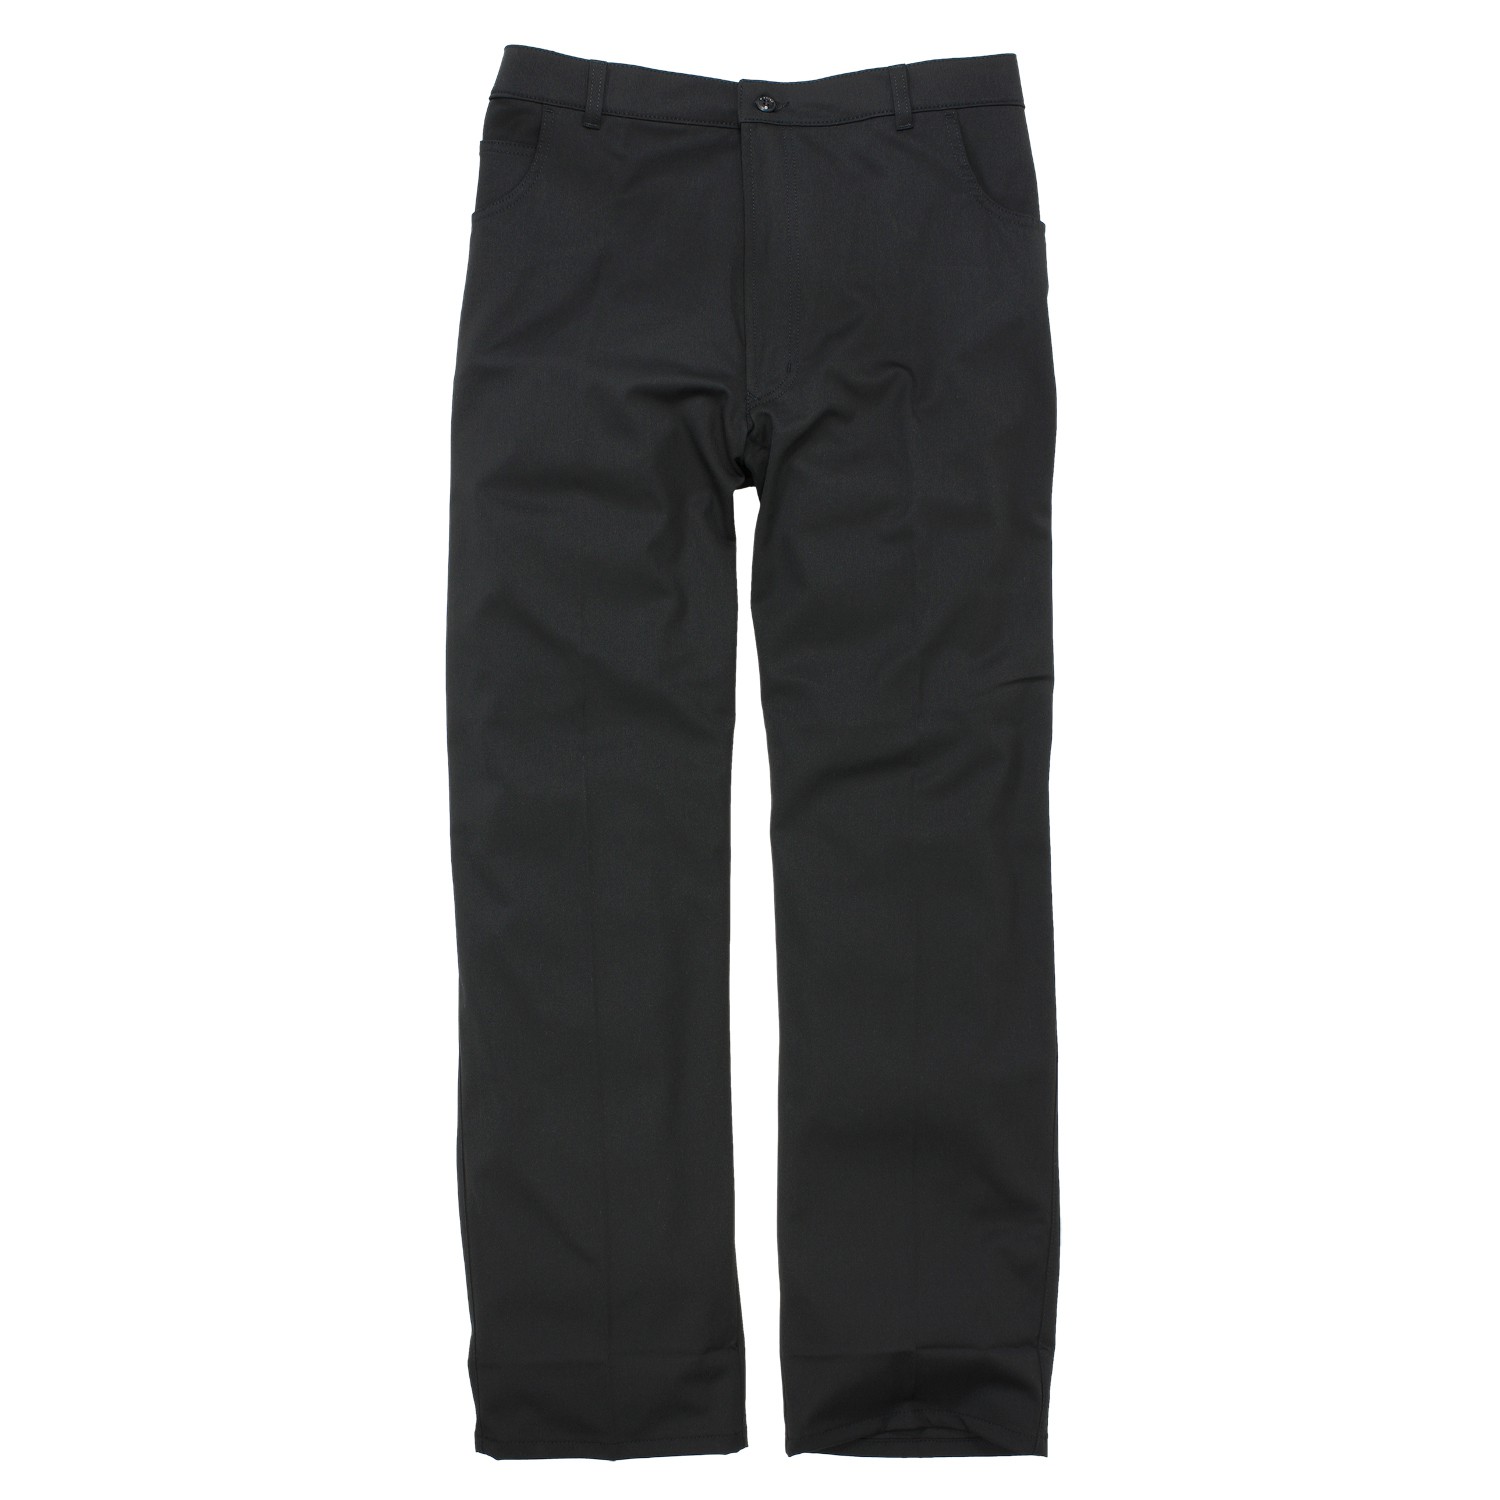 Sporty trousers in black by Pionier in oversizes until 36 and 64